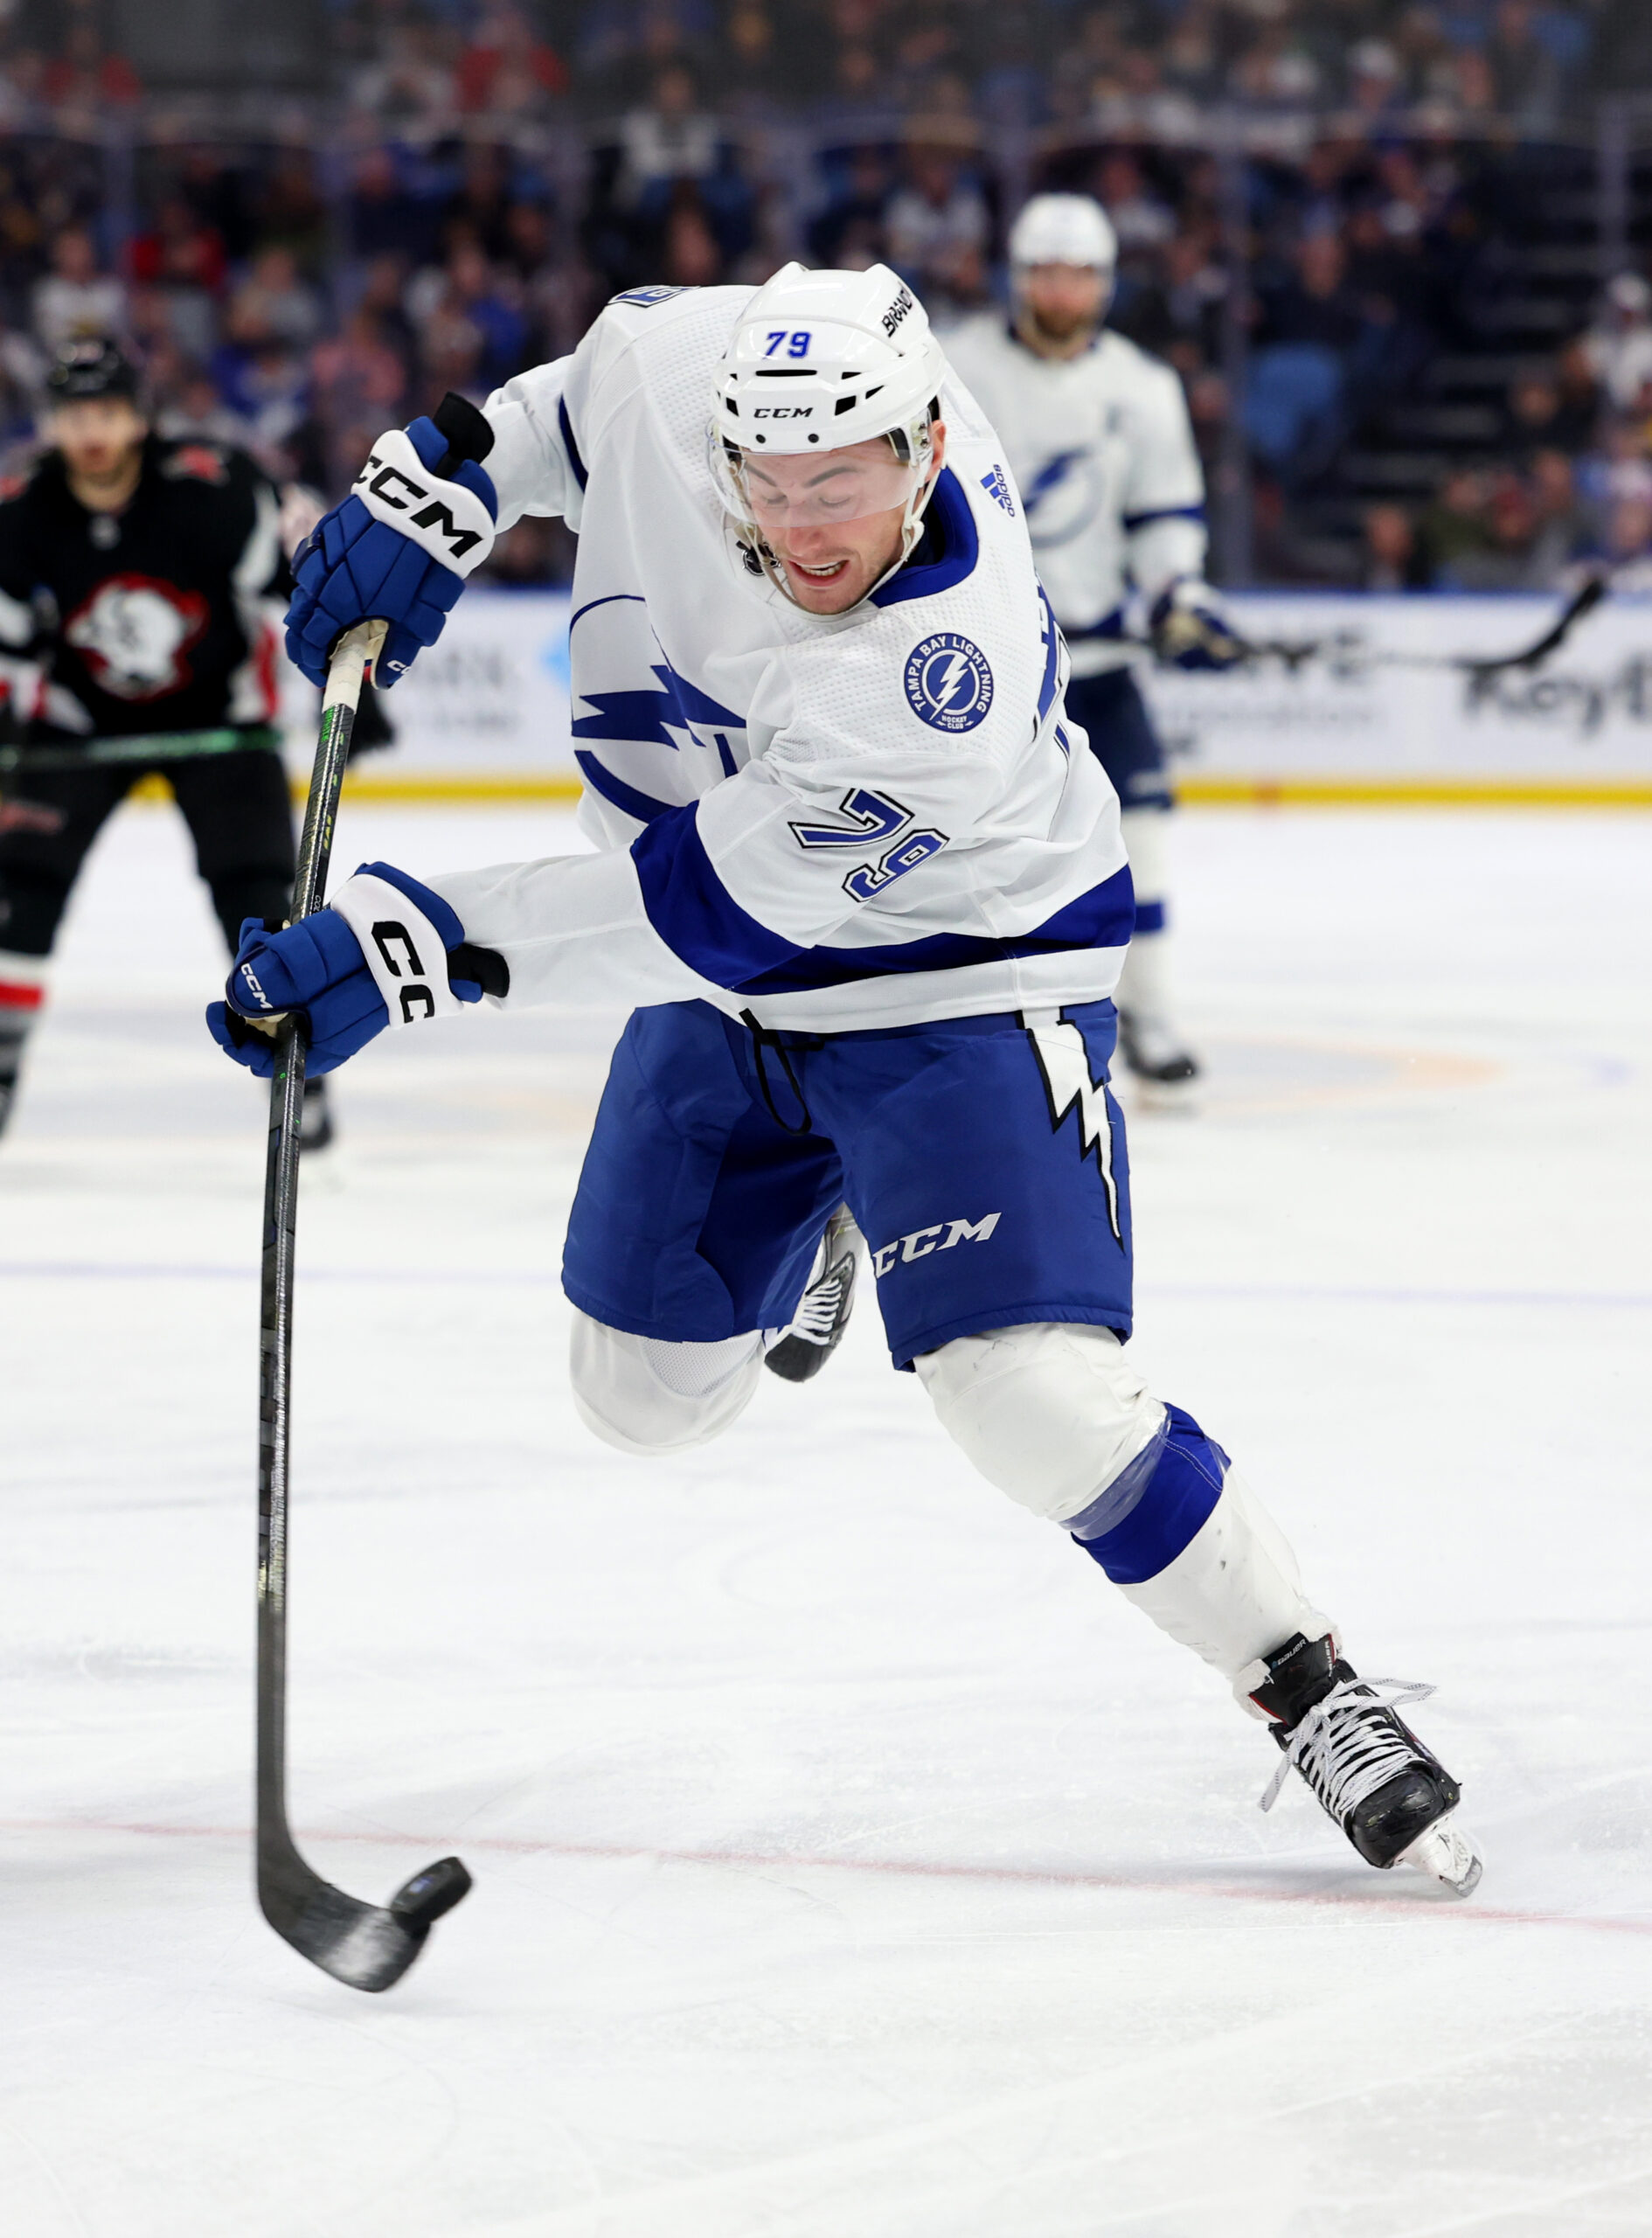 Lightning trade Ross Colton's rights to Avalanche for 2nd-round pick